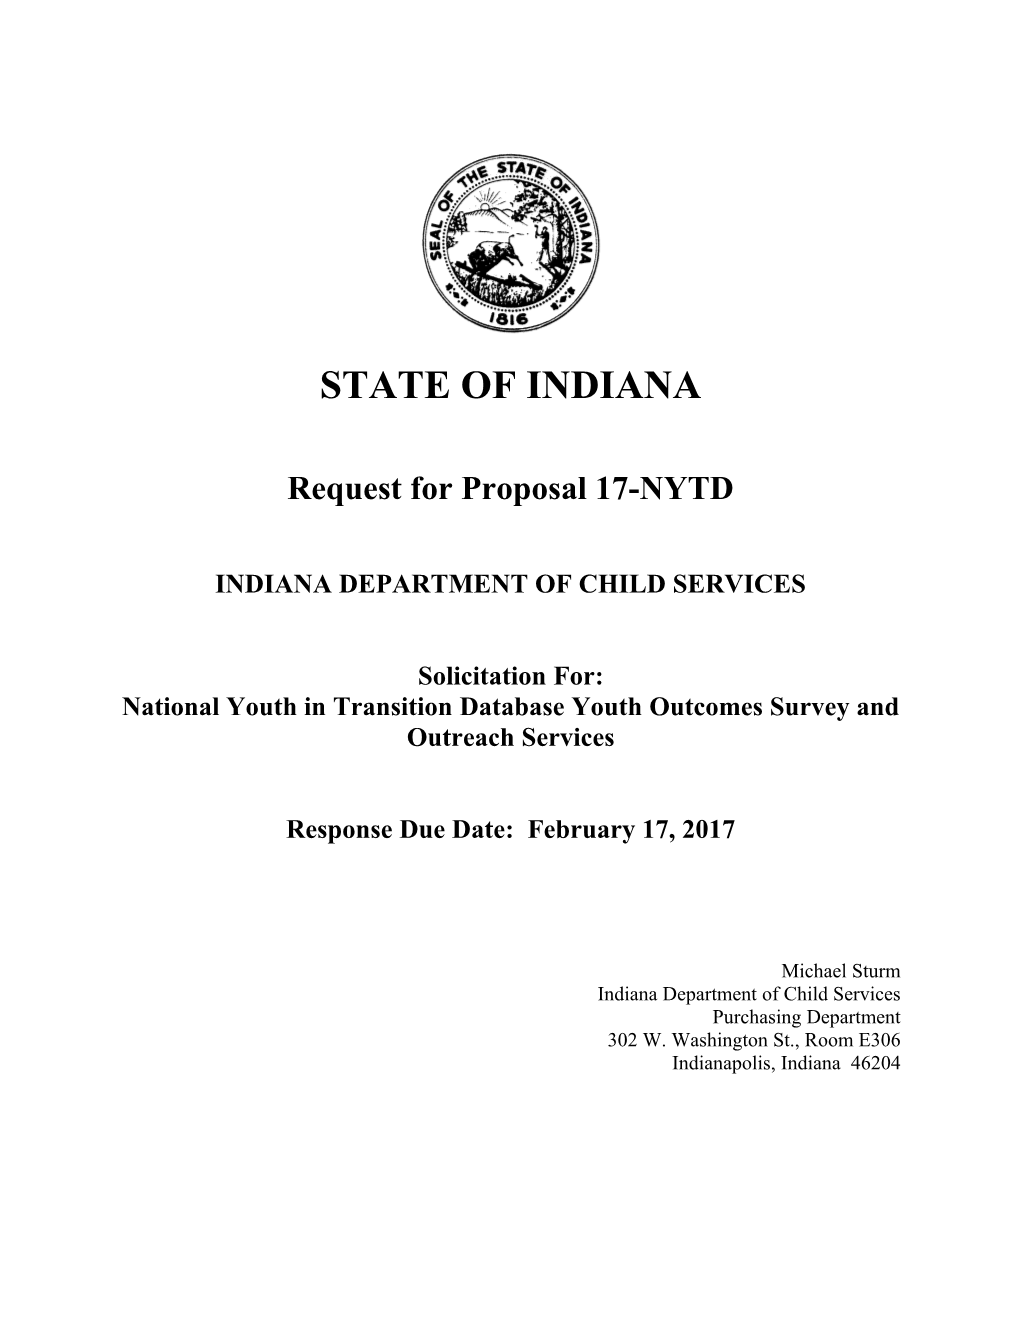 Request for Proposal 17-NYTD s1